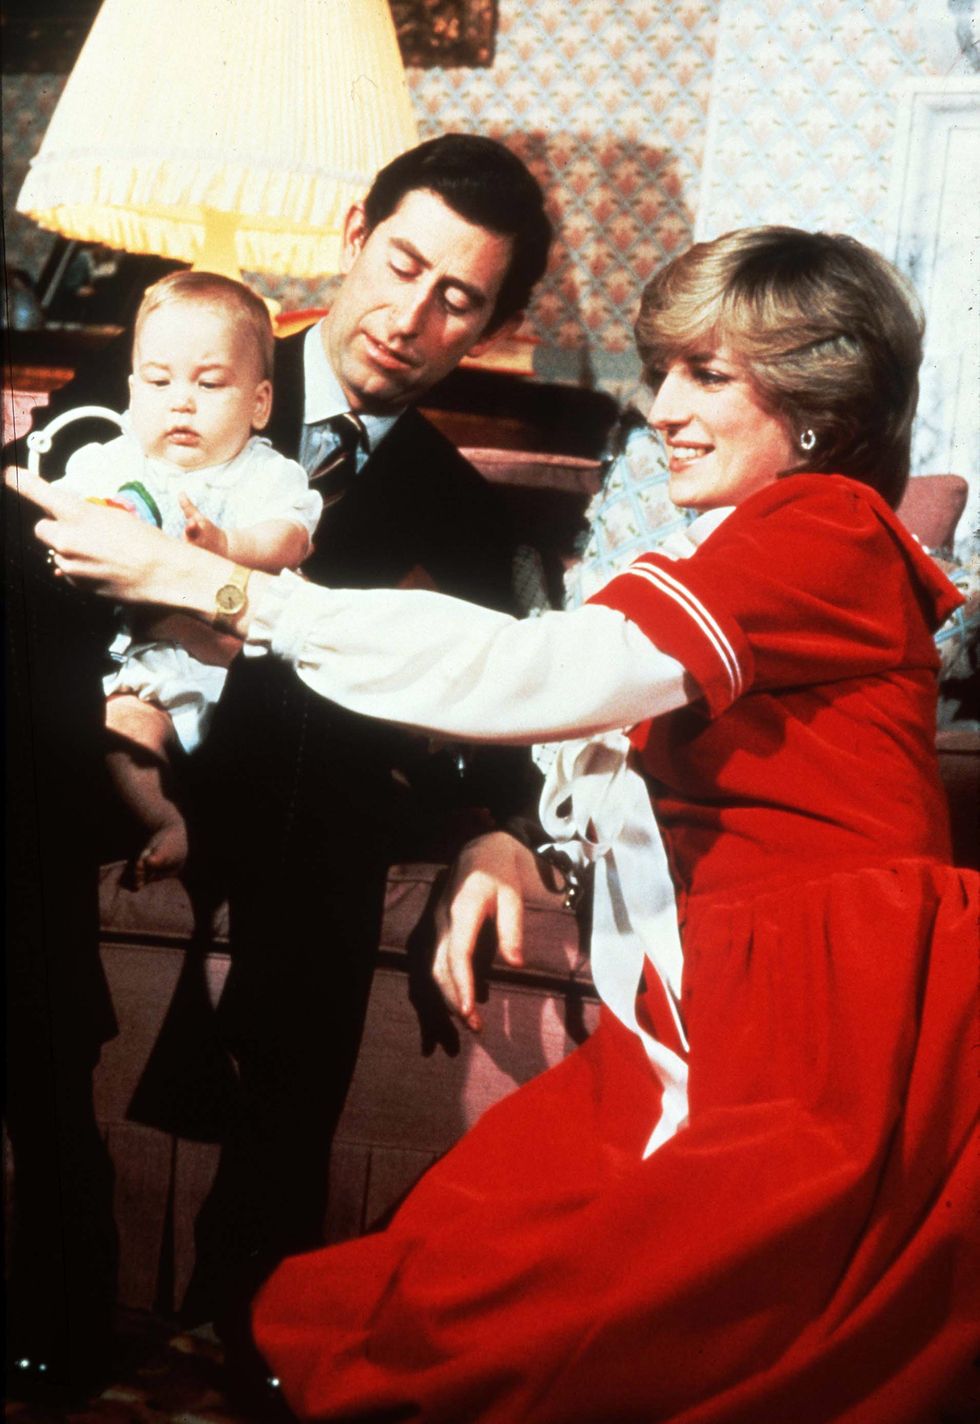 london  december 01  princess diana, princess of wales and prince charles, prince of wales pose with their baby son prince william during the christmas season at kensington palace on december 01, 1982 in london, england photo by anwar husseingetty images